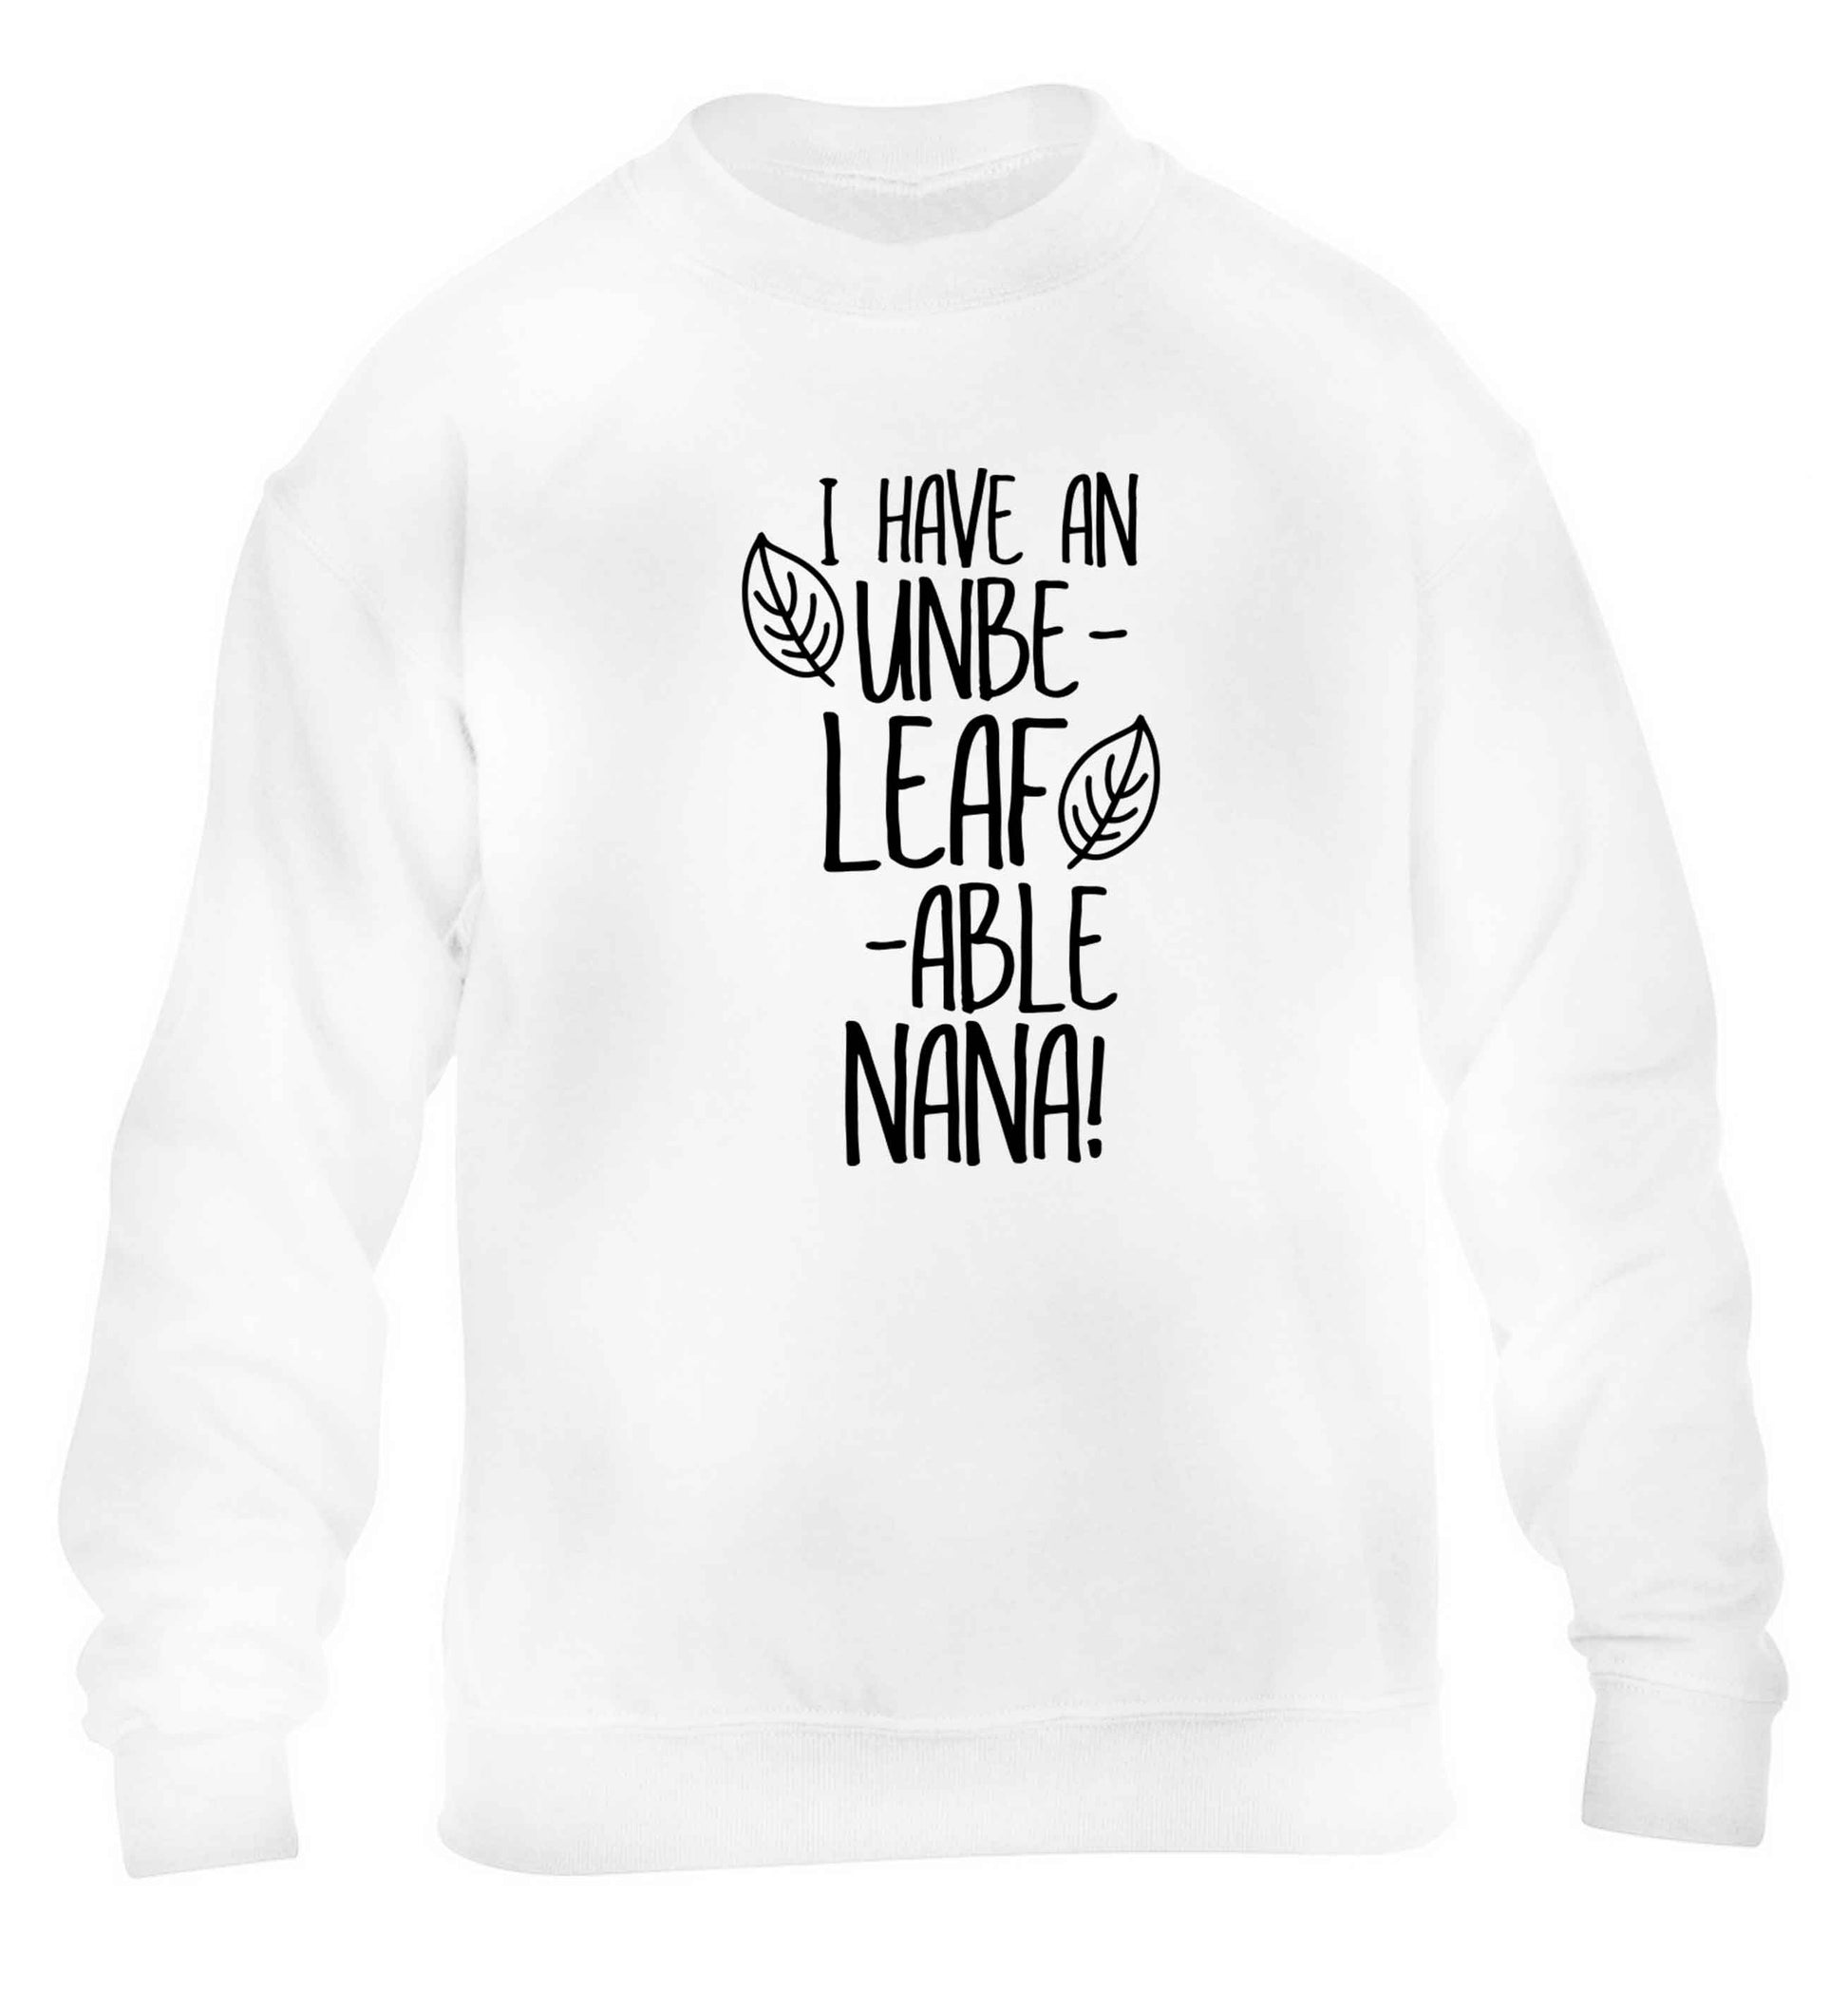 I have an unbe-leaf-able nana children's white sweater 12-13 Years